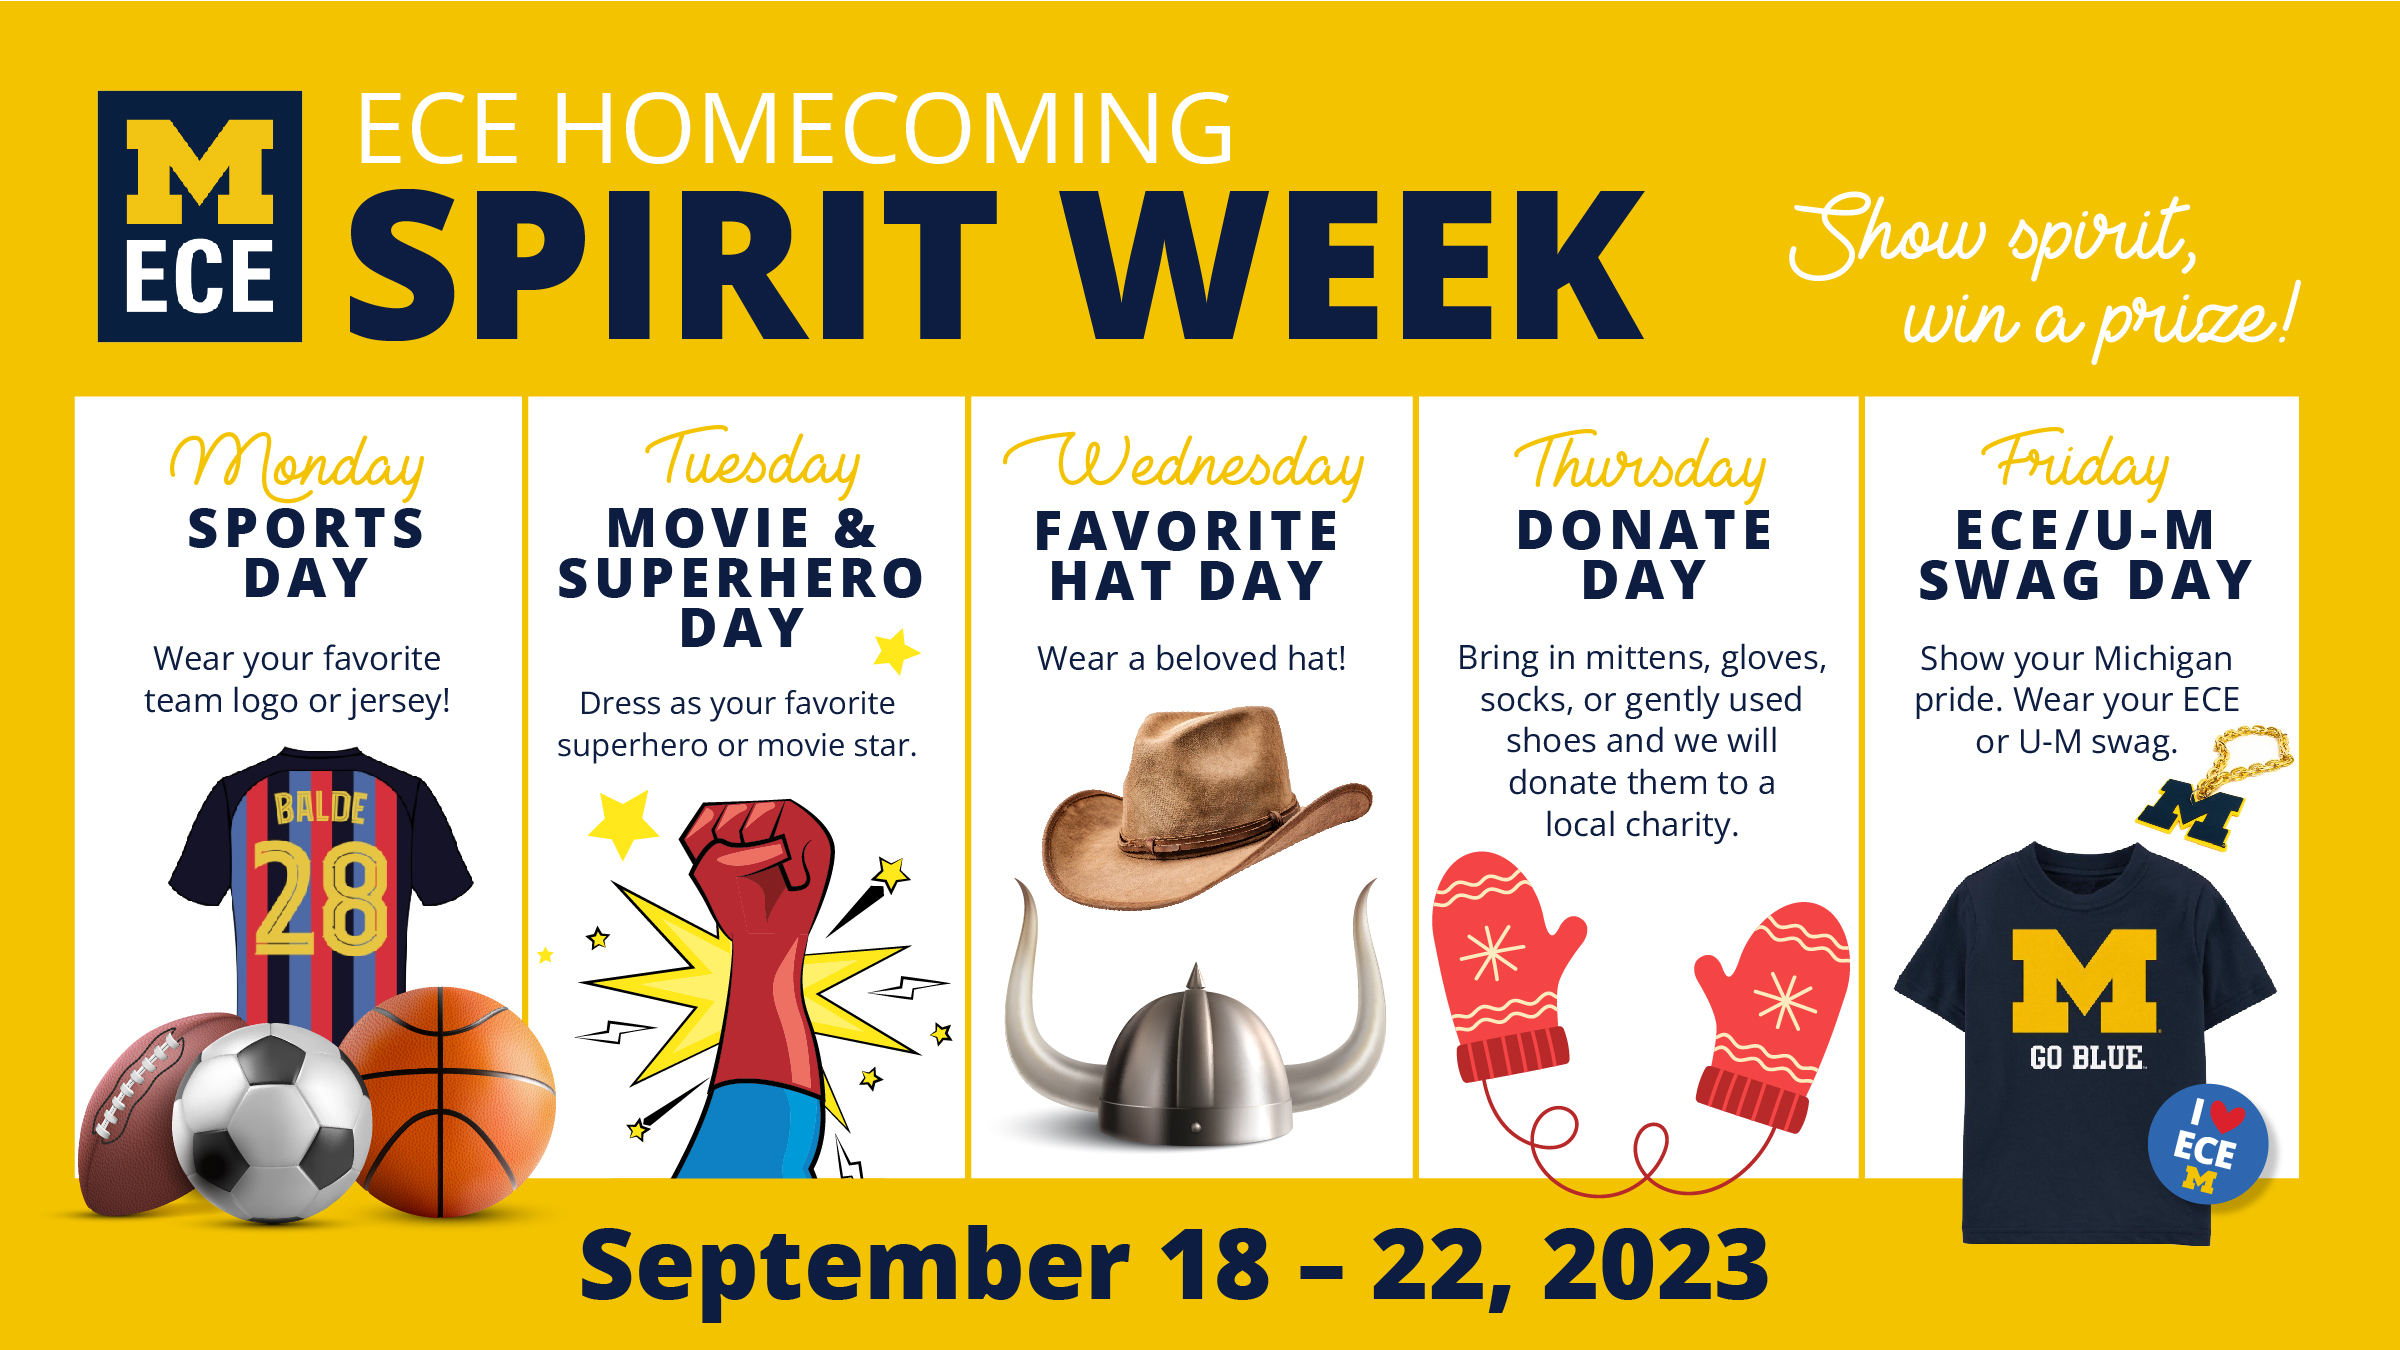 Spirit Week flier. Monday: Sports Day. Tuesday: Super hero or movie day. Wednesday: Hat day. Thursday: Donate mittens day. Friday: wear ECE clothing day